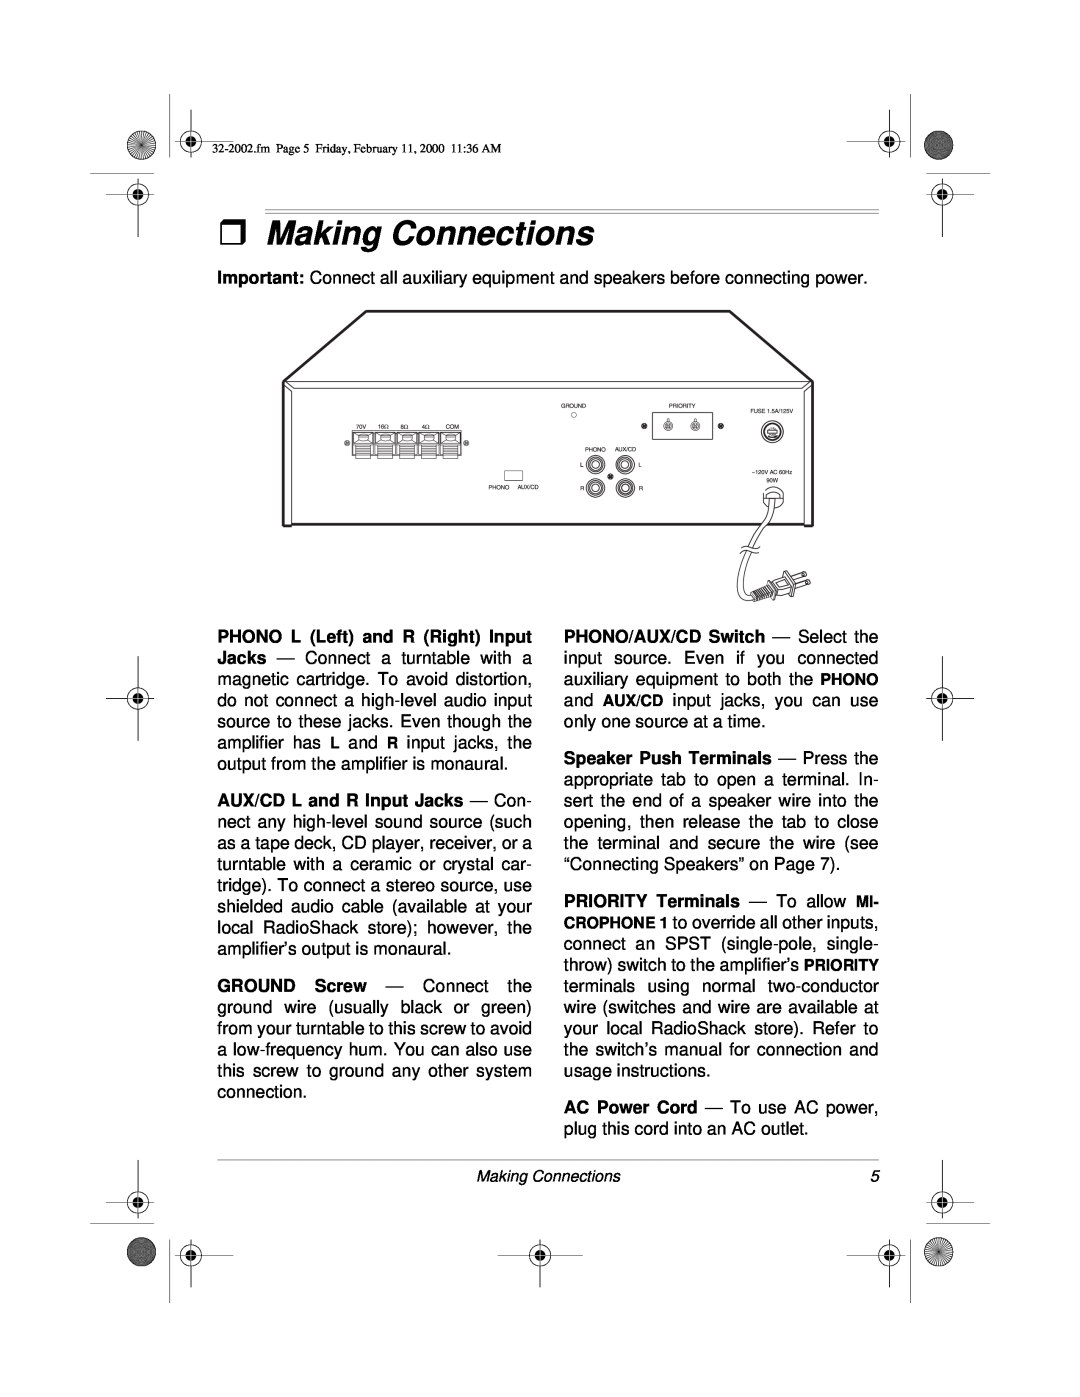 Radio Shack MPA-50 owner manual ˆMaking Connections 